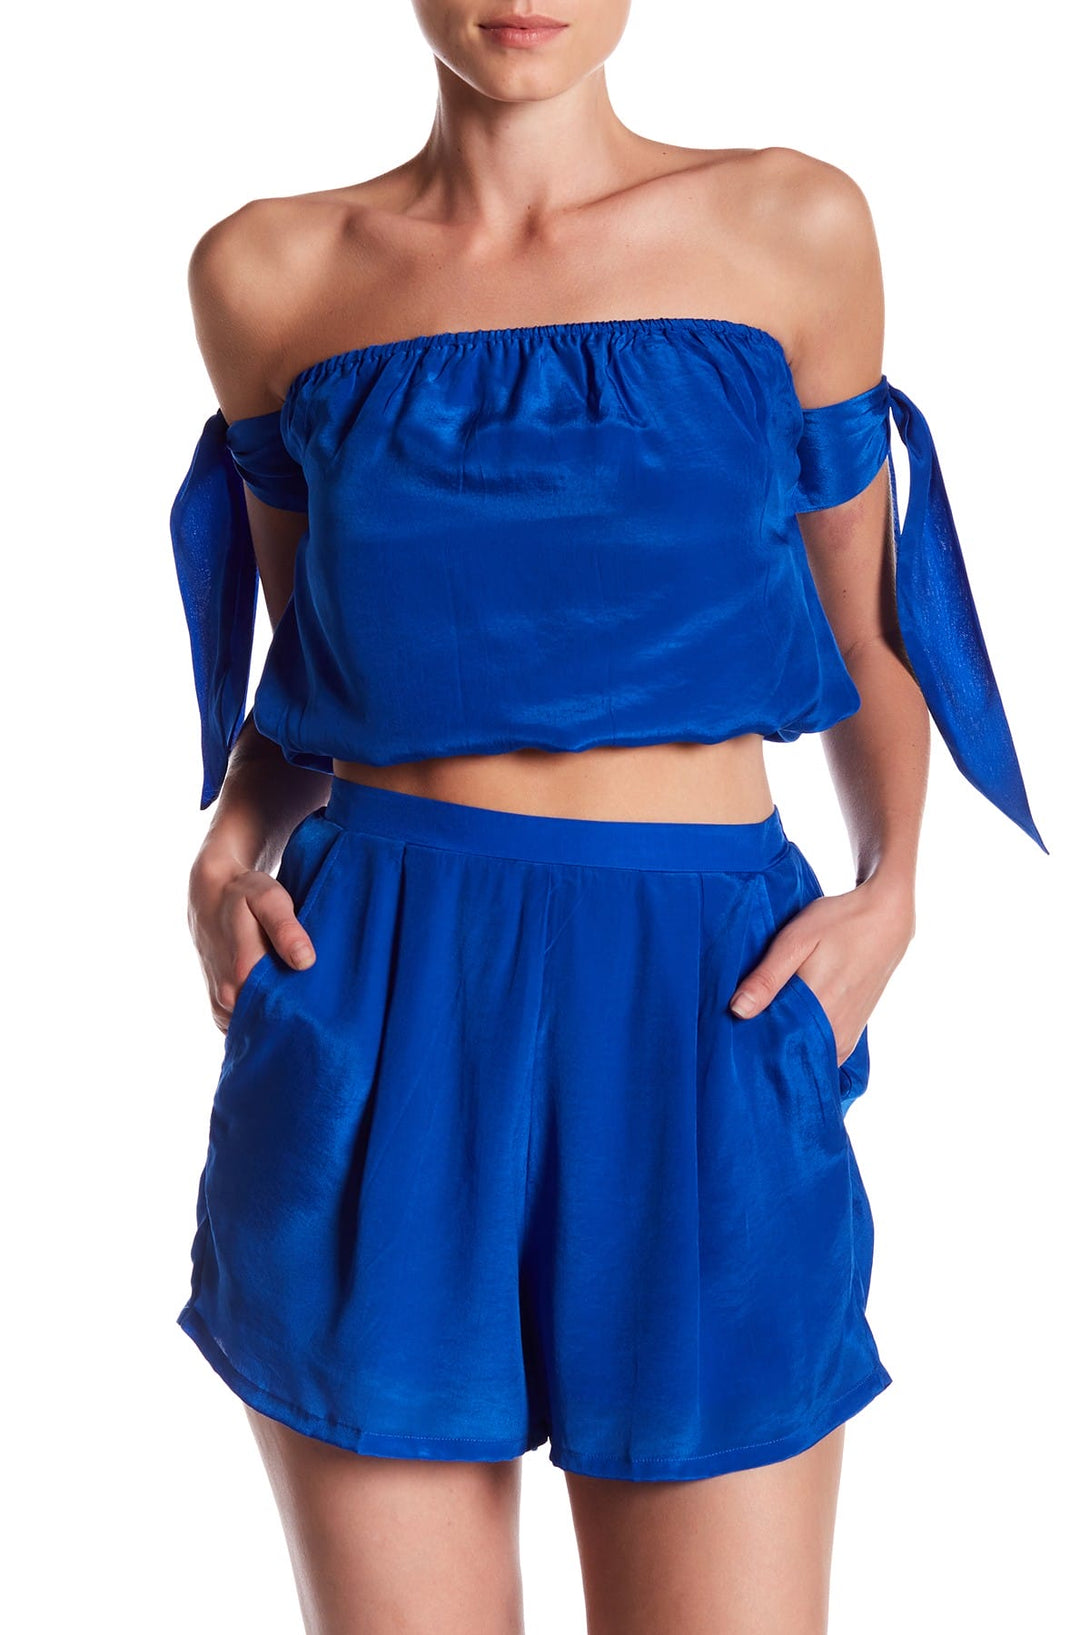  blue shorts for women, Shahida Parides,  shorts for thick thighs, women's shorts with pockets,